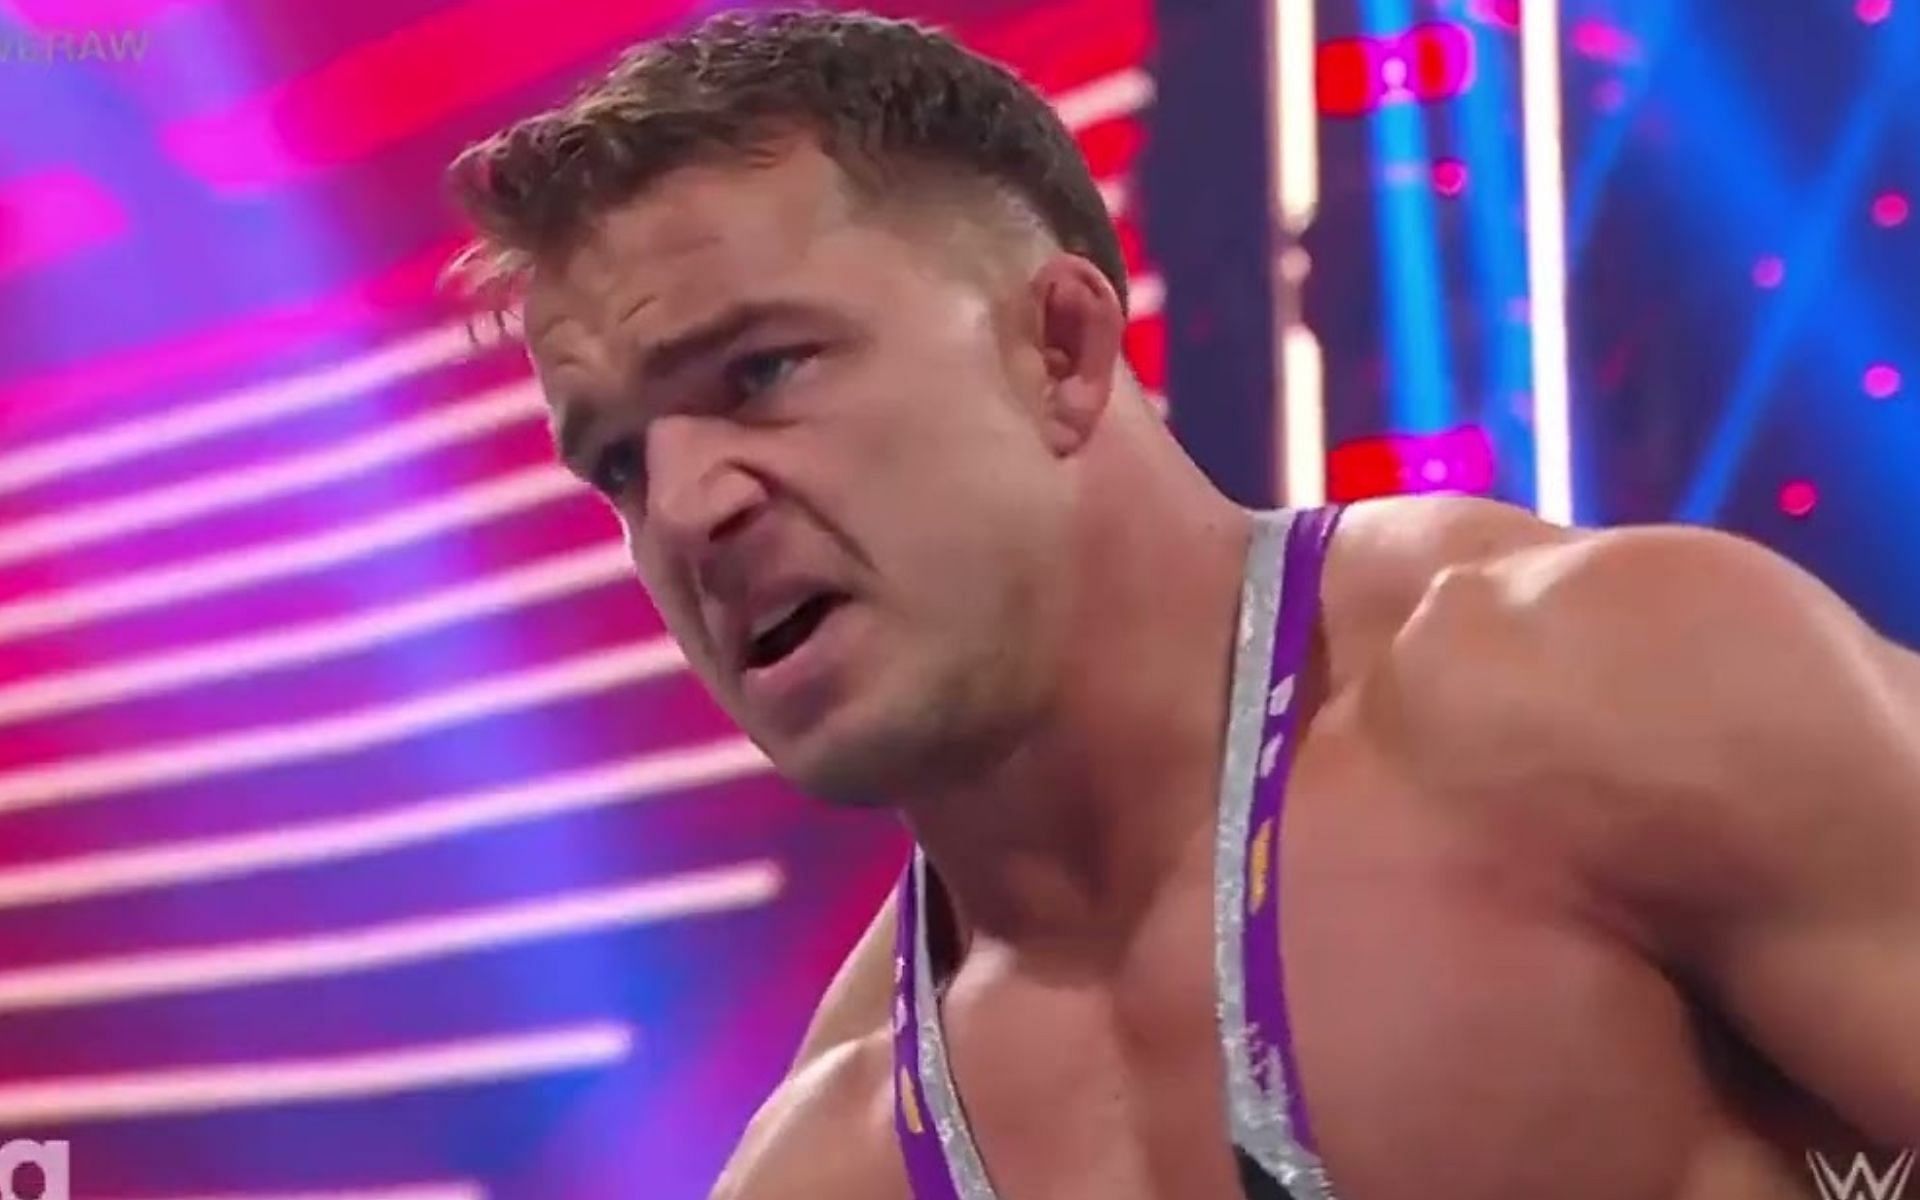 Gable continues to be WWE